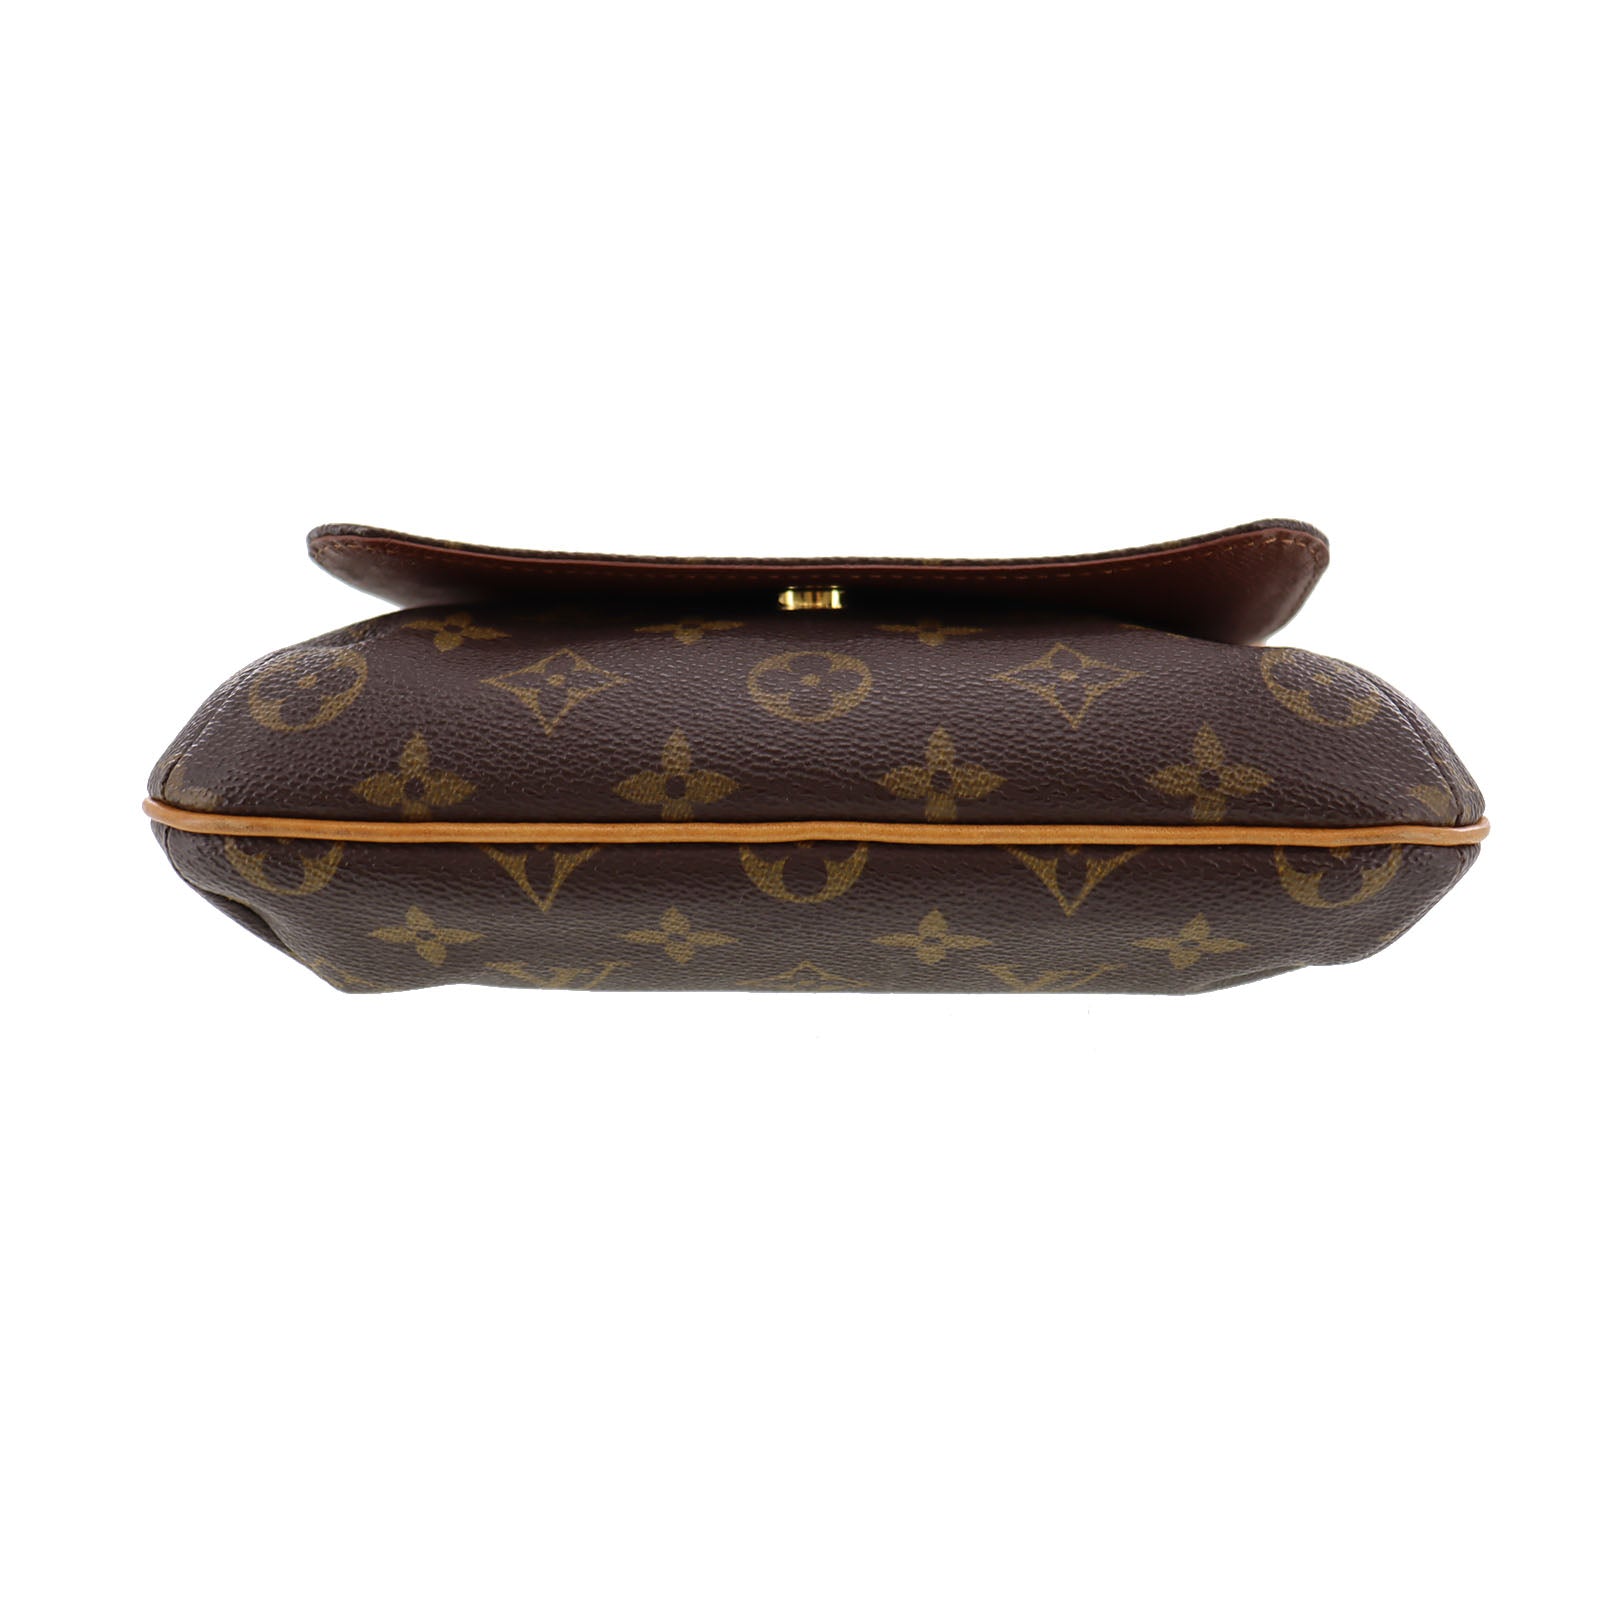 Buy [Used] LOUIS VUITTON Musette Salsa Shoulder Bag Short Strap Monogram  M51258 from Japan - Buy authentic Plus exclusive items from Japan